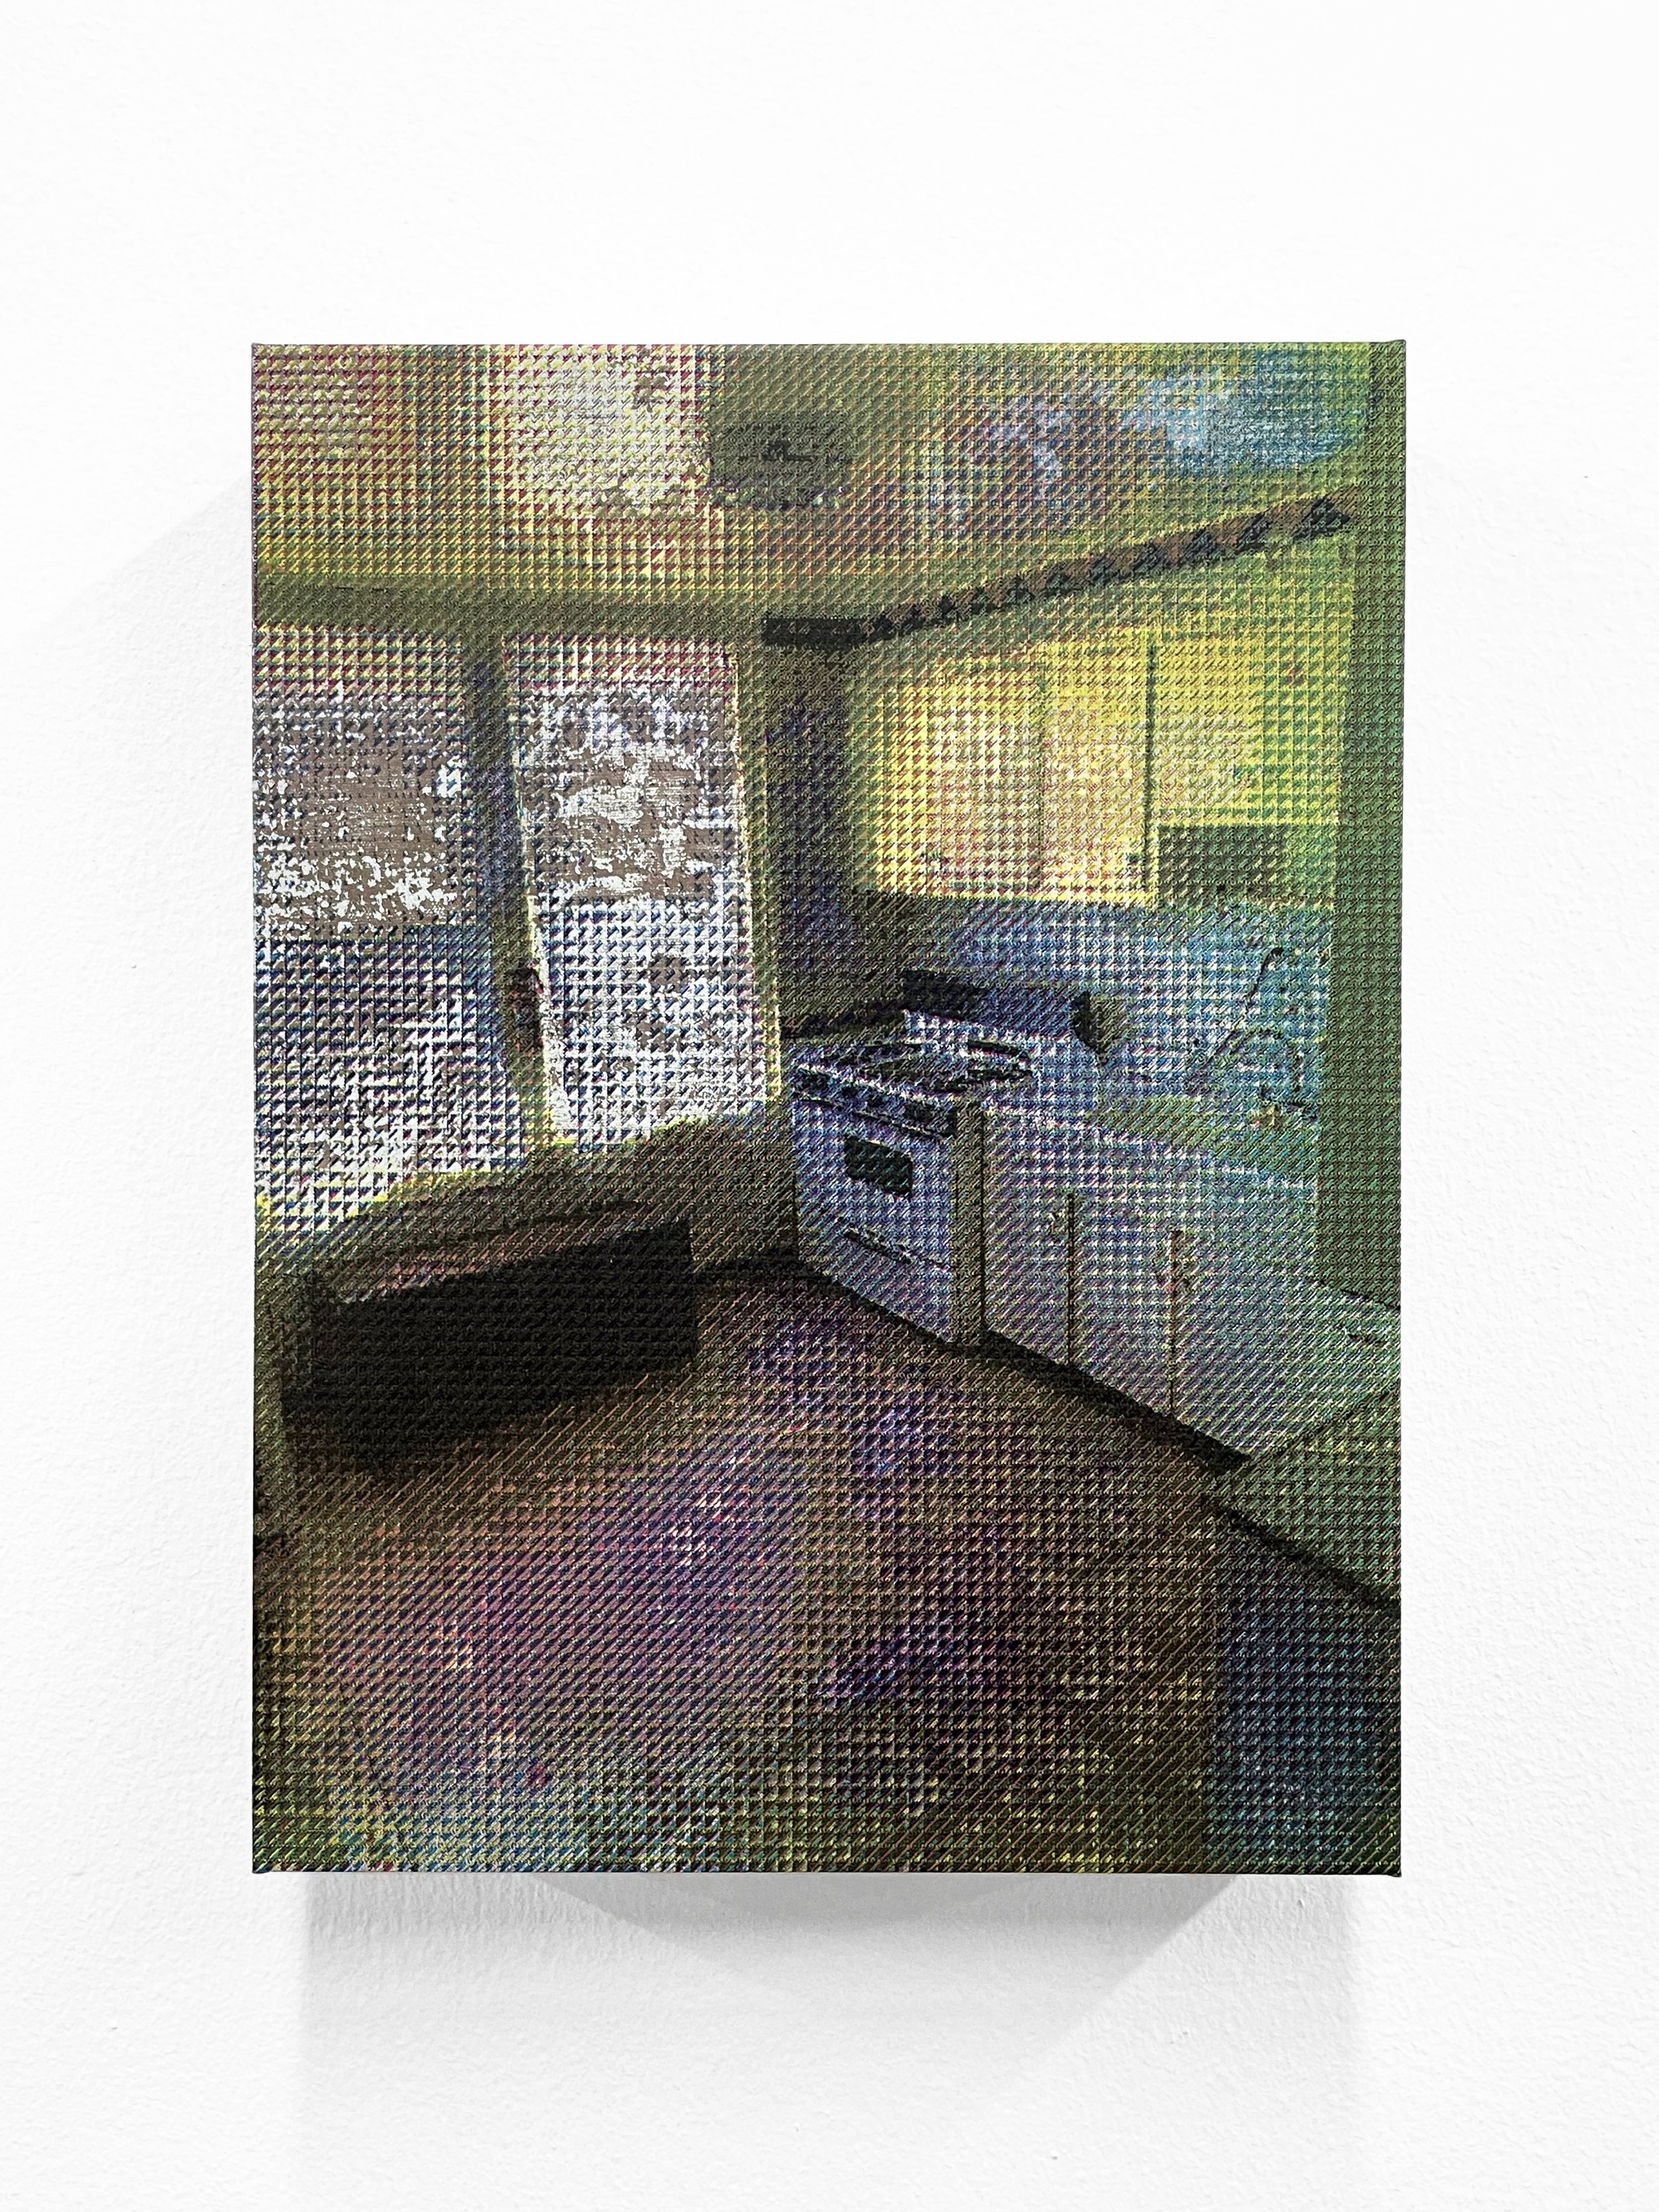    A last look—kitchen No. 3  , Stretched screenprint on poly-cotton fabric, 12” x 9” x 2” 